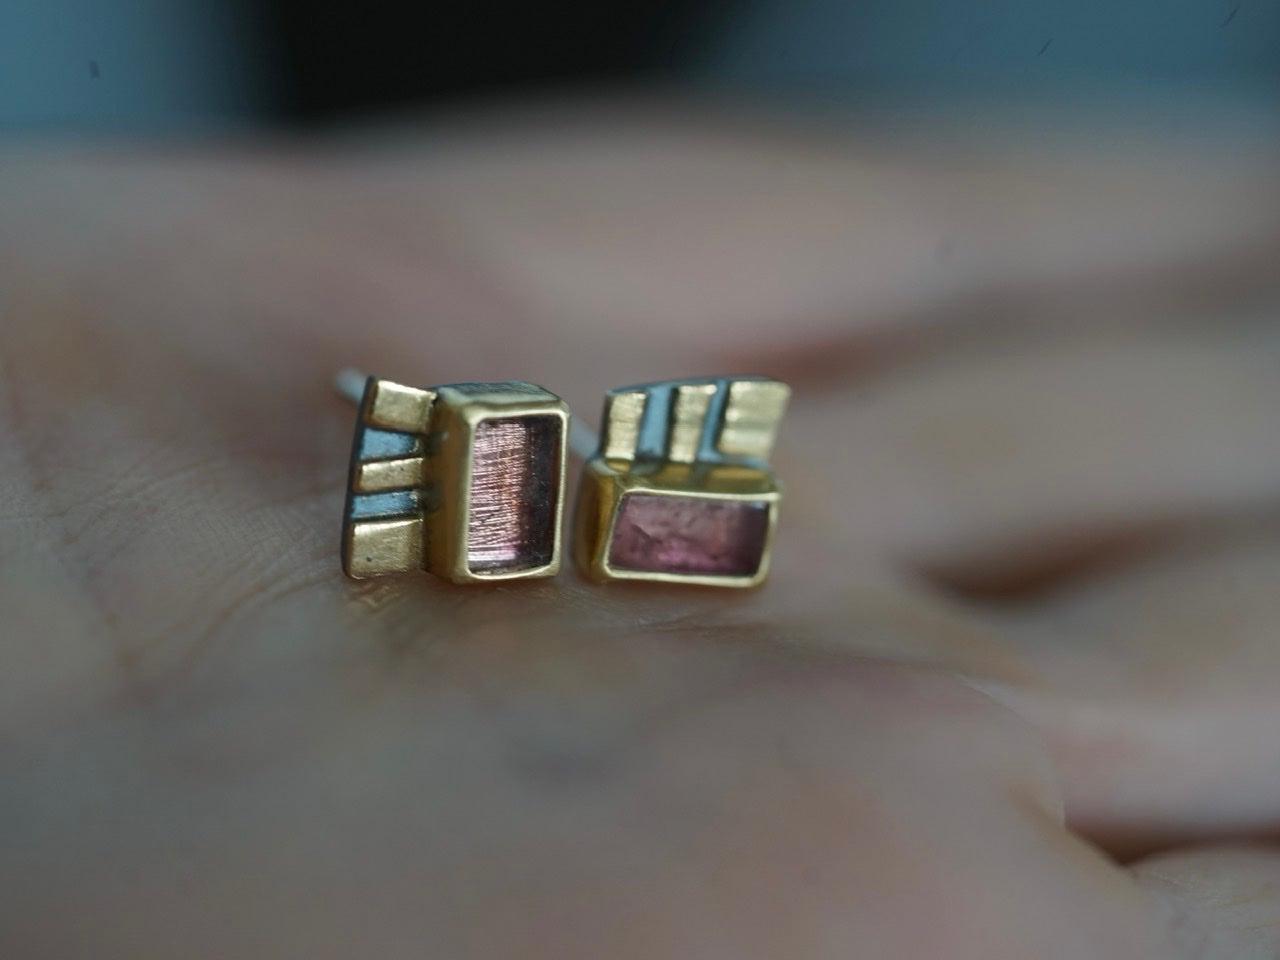 Rose tourmaline and 22k gold post earrings